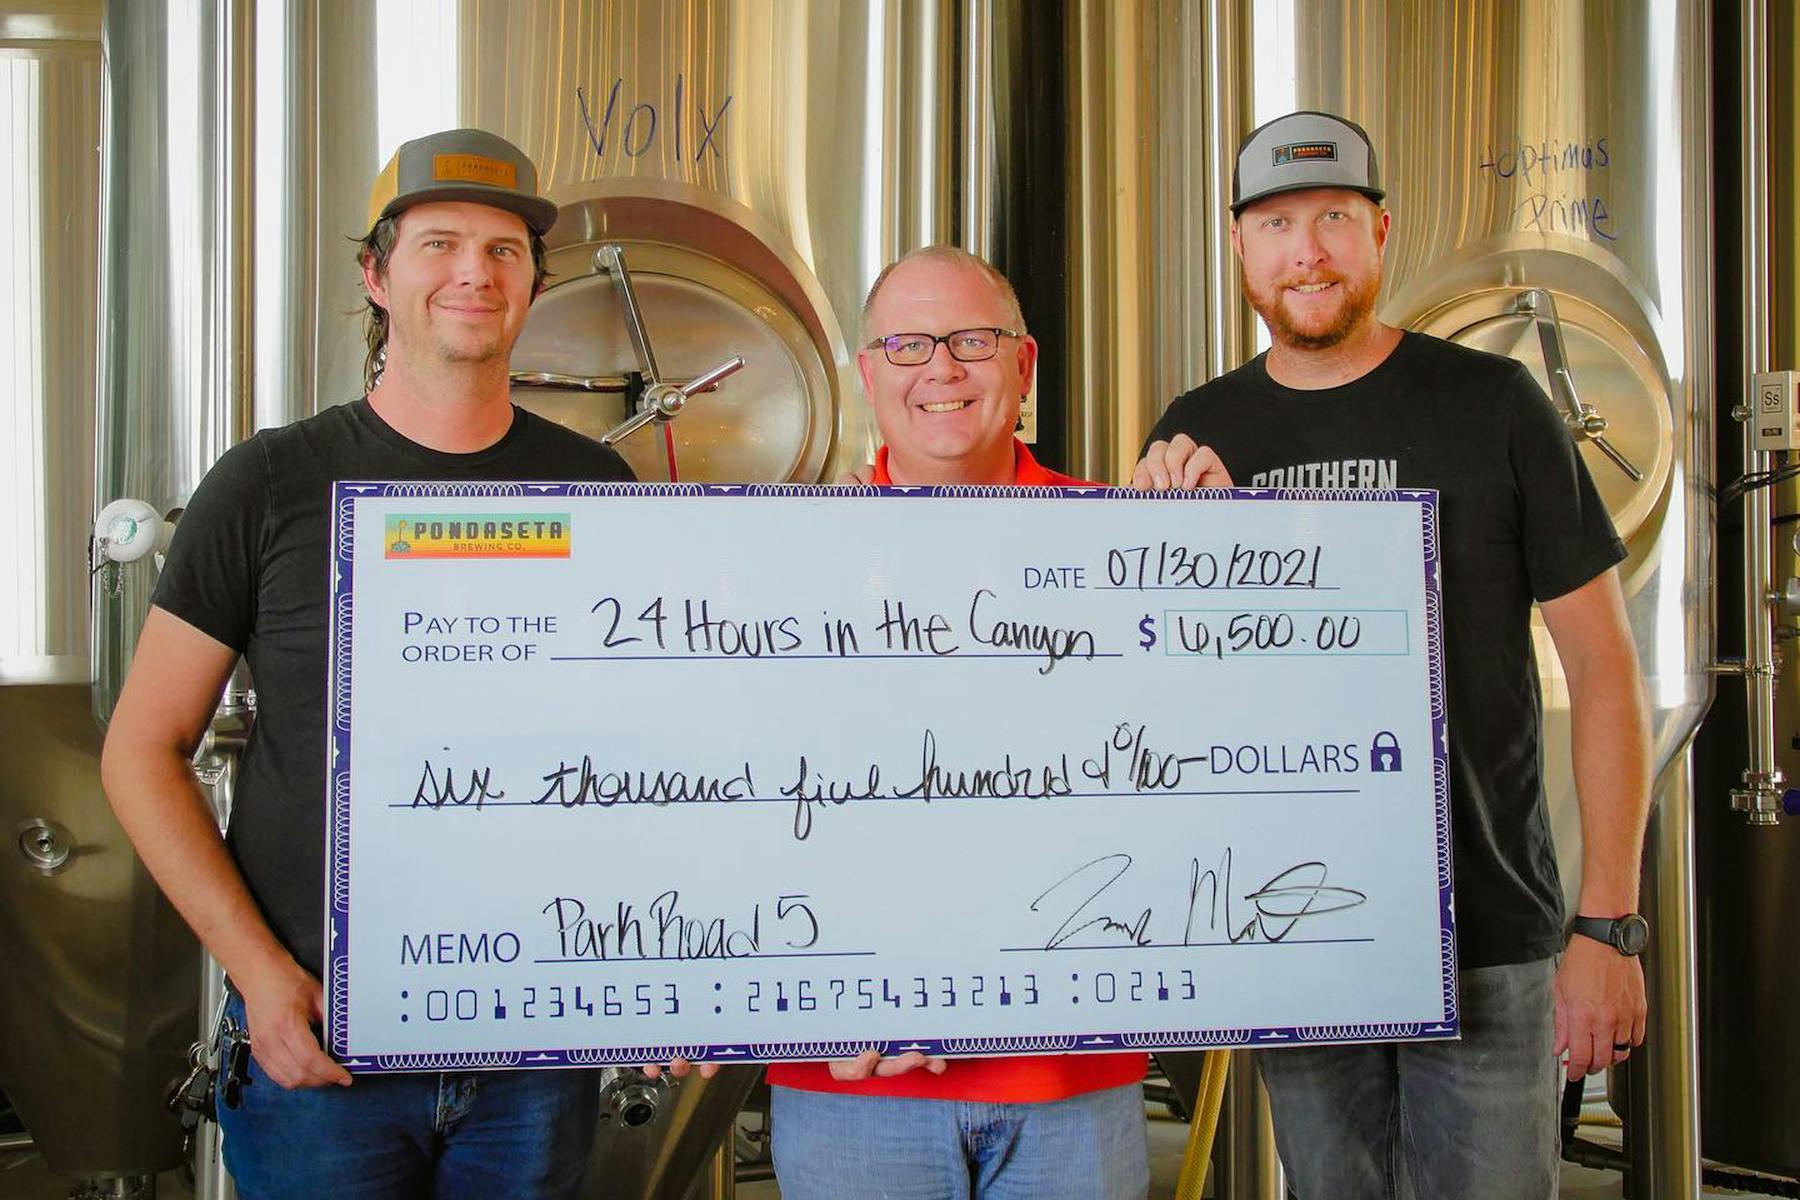 3 Men hold a giant check made out to 24 Hours in the Canyon